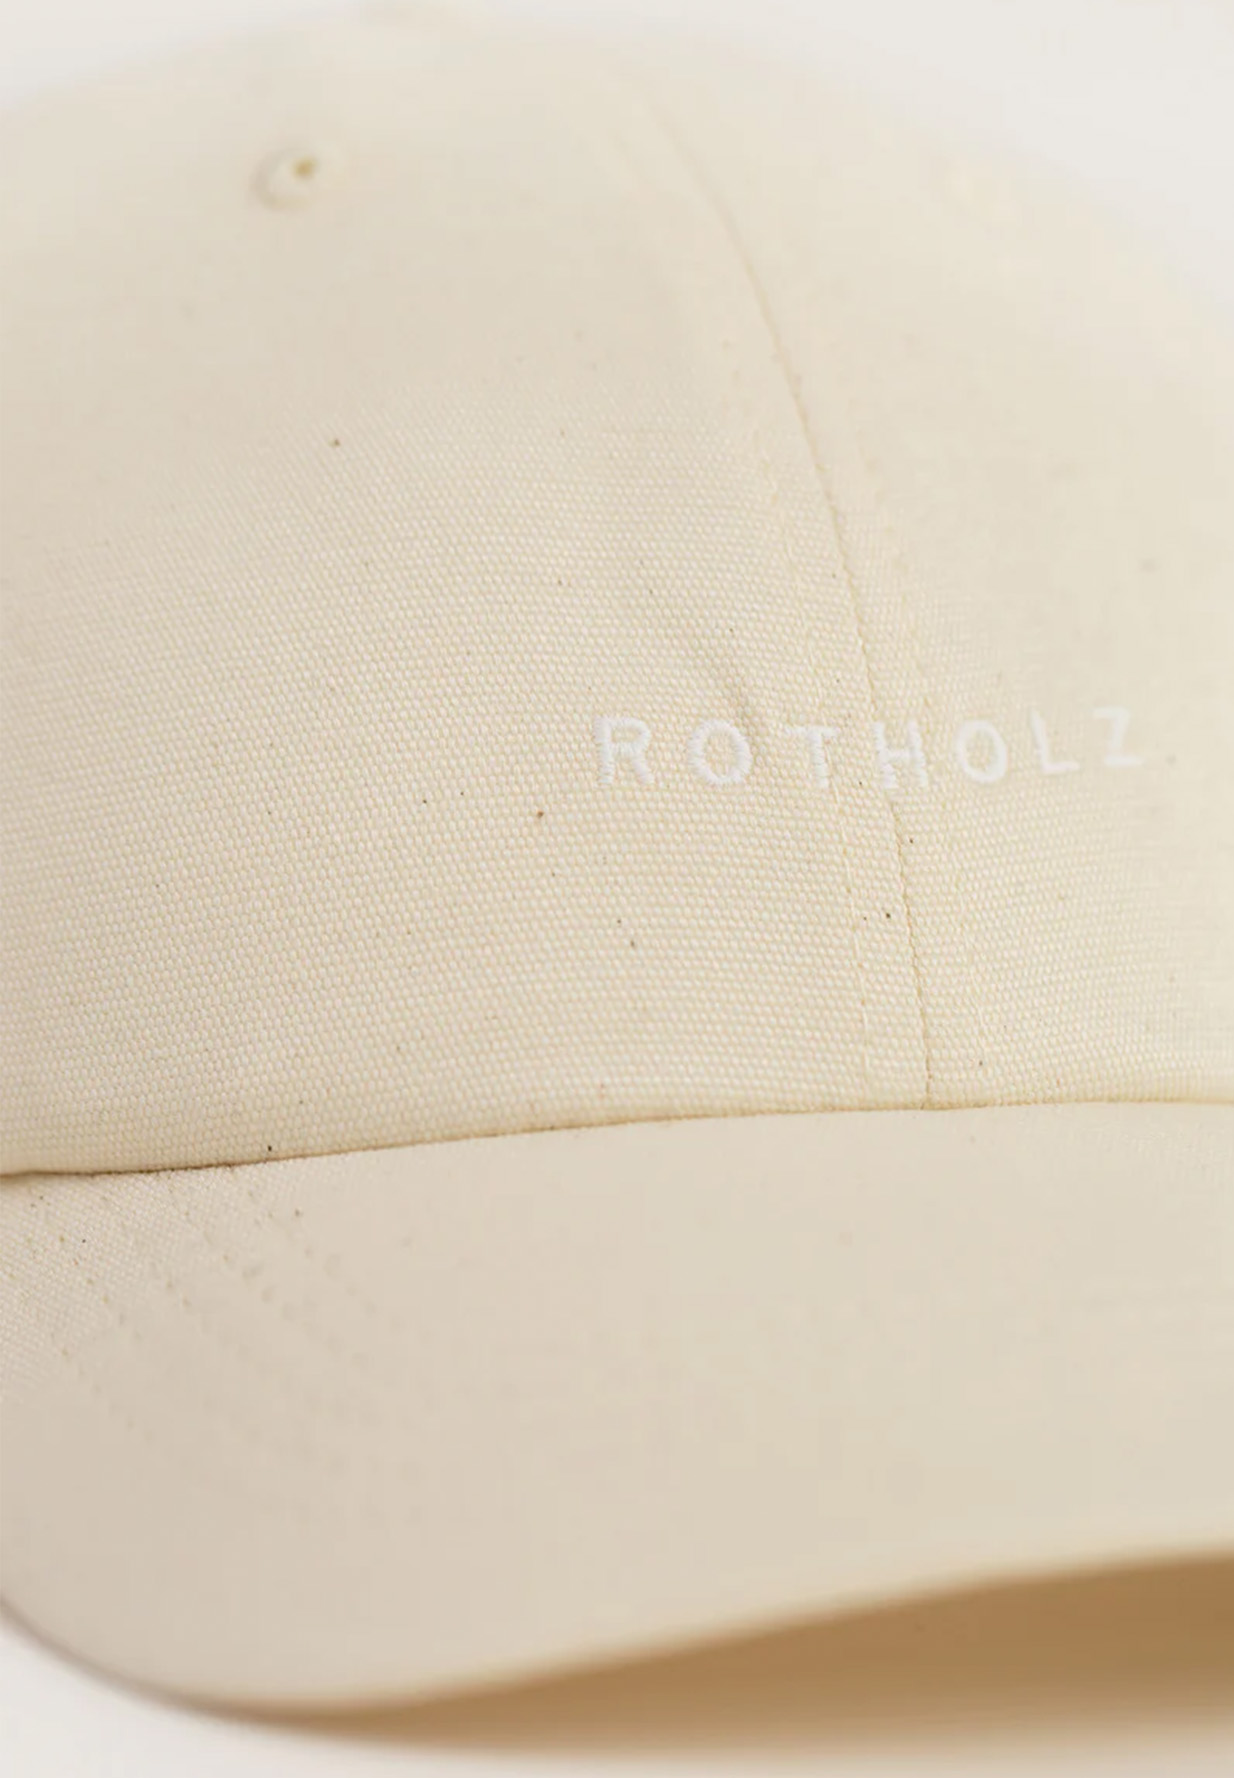 ROTHOLZ Classic Cap Natural White   natural white One Size